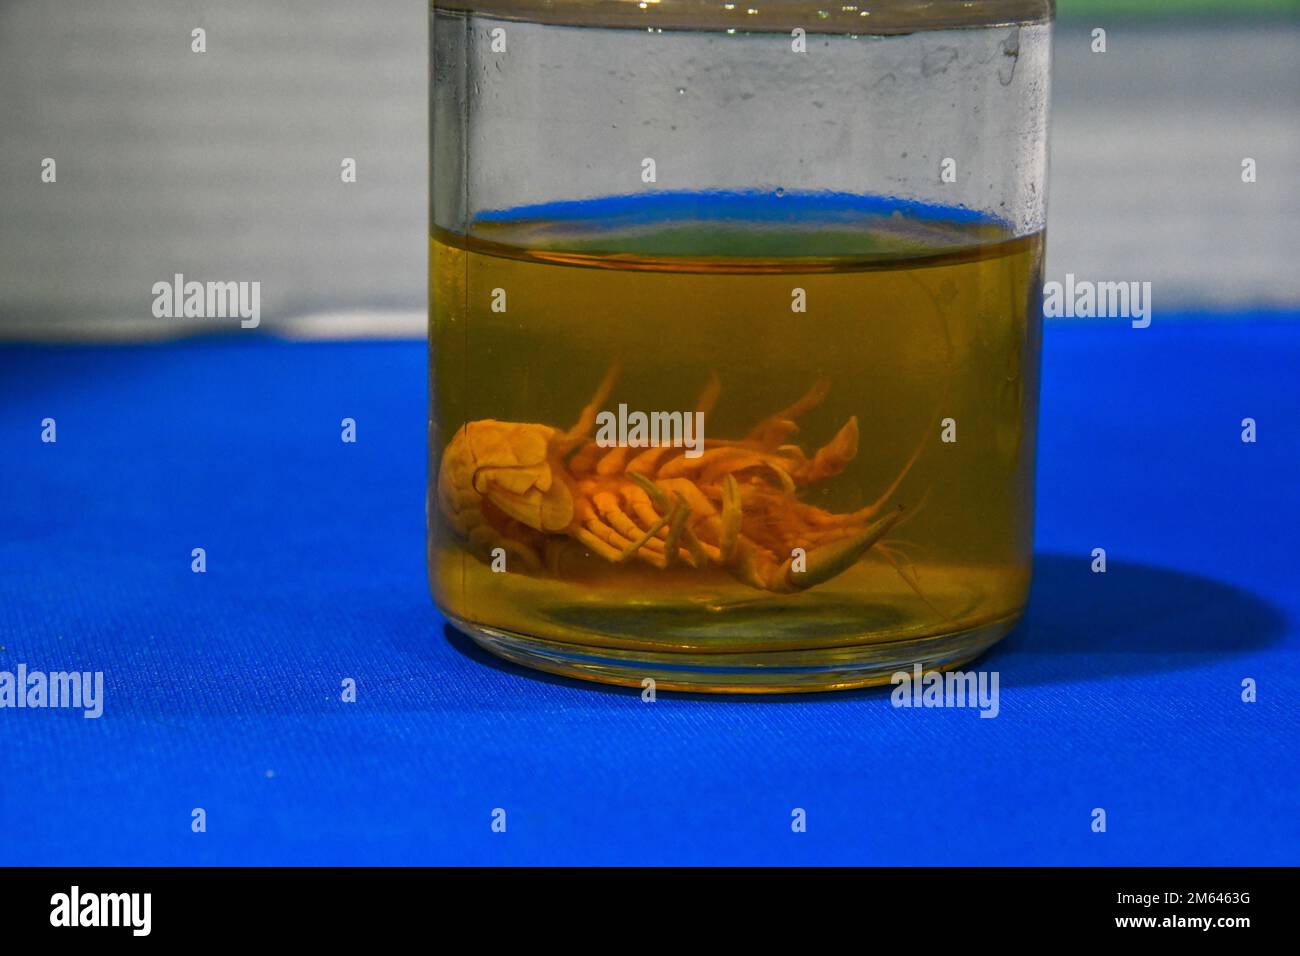 A crawfish is displayed in formalin at a Science, Technology, Engineering and Mathematics (STEM) fair, held at Altus High School, Altus, Oklahoma, March 30, 2022. Crawfish are considered benthic macroinvertebrates, or small aquatic animals with no backbone, which are studied to test water pollution. Stock Photo